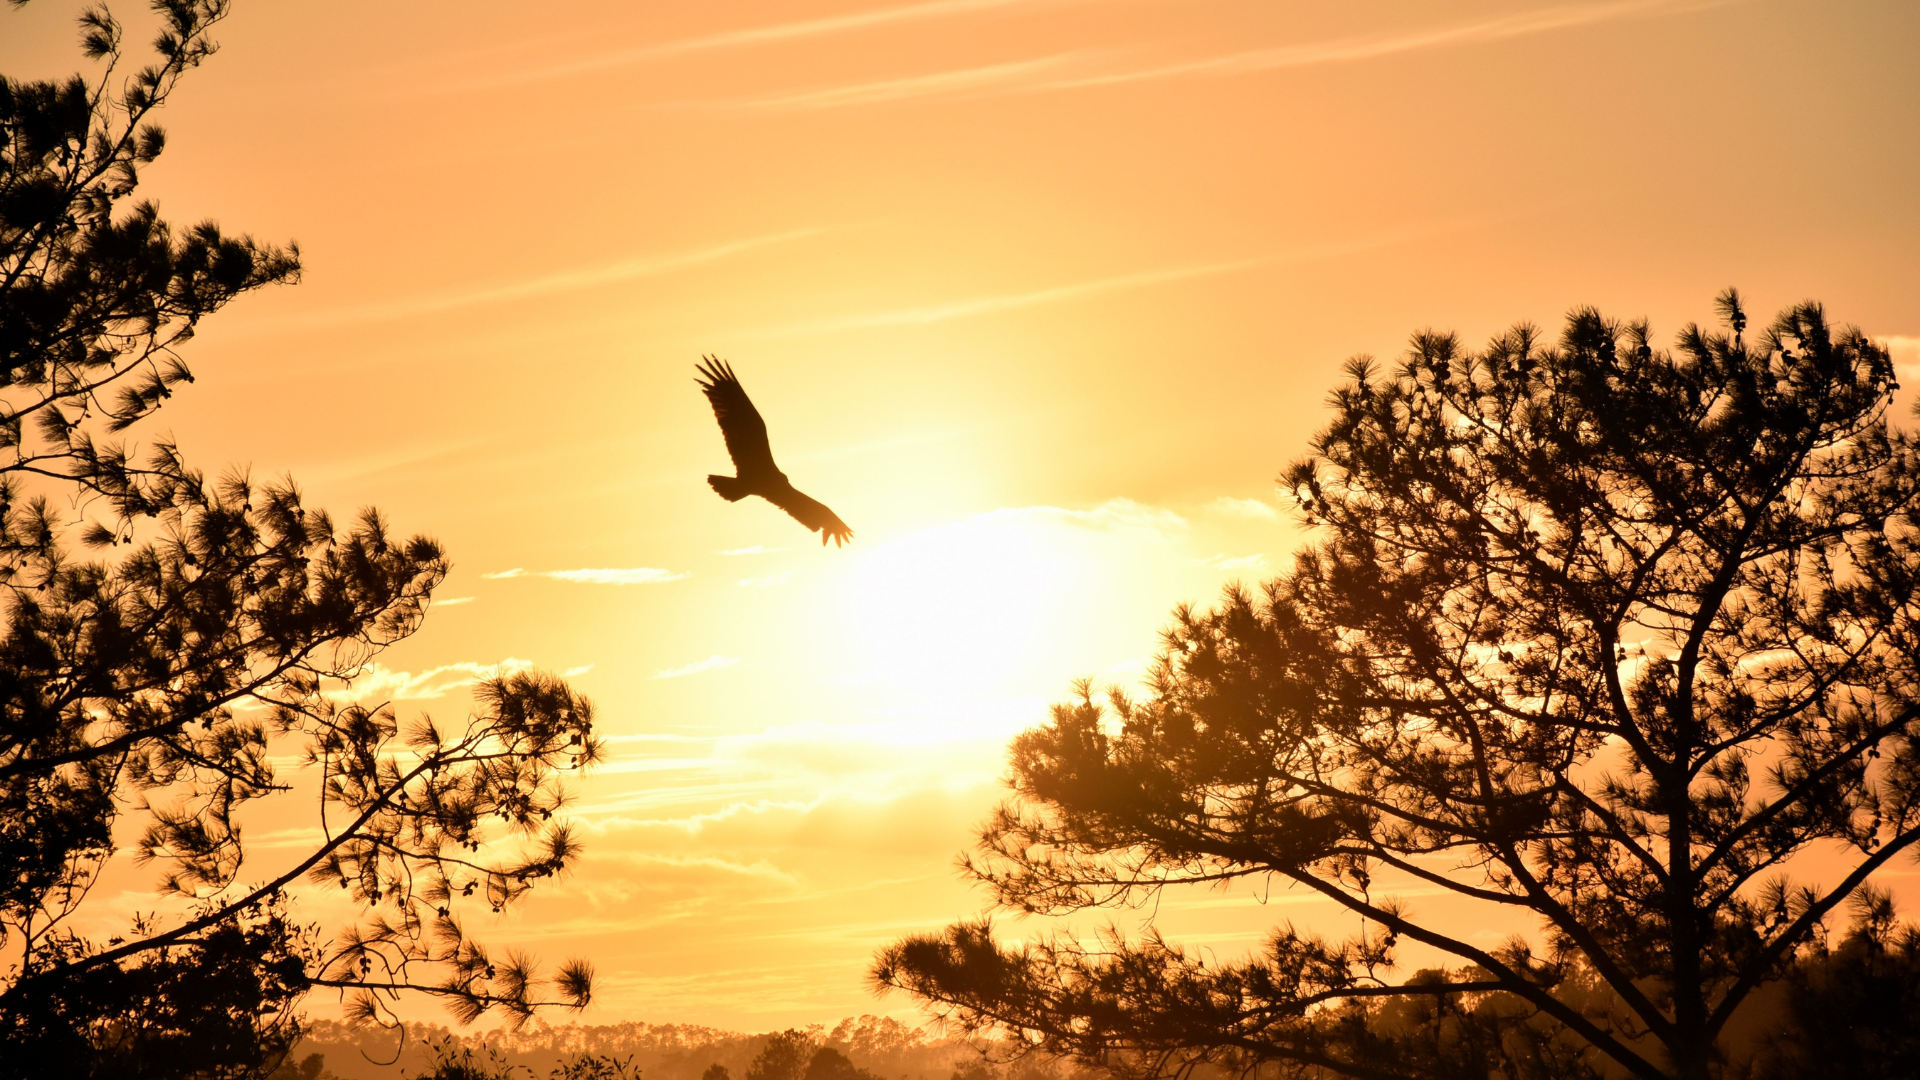 the silhouette of an eagle flying through the trees with a pale orange sunset in the background